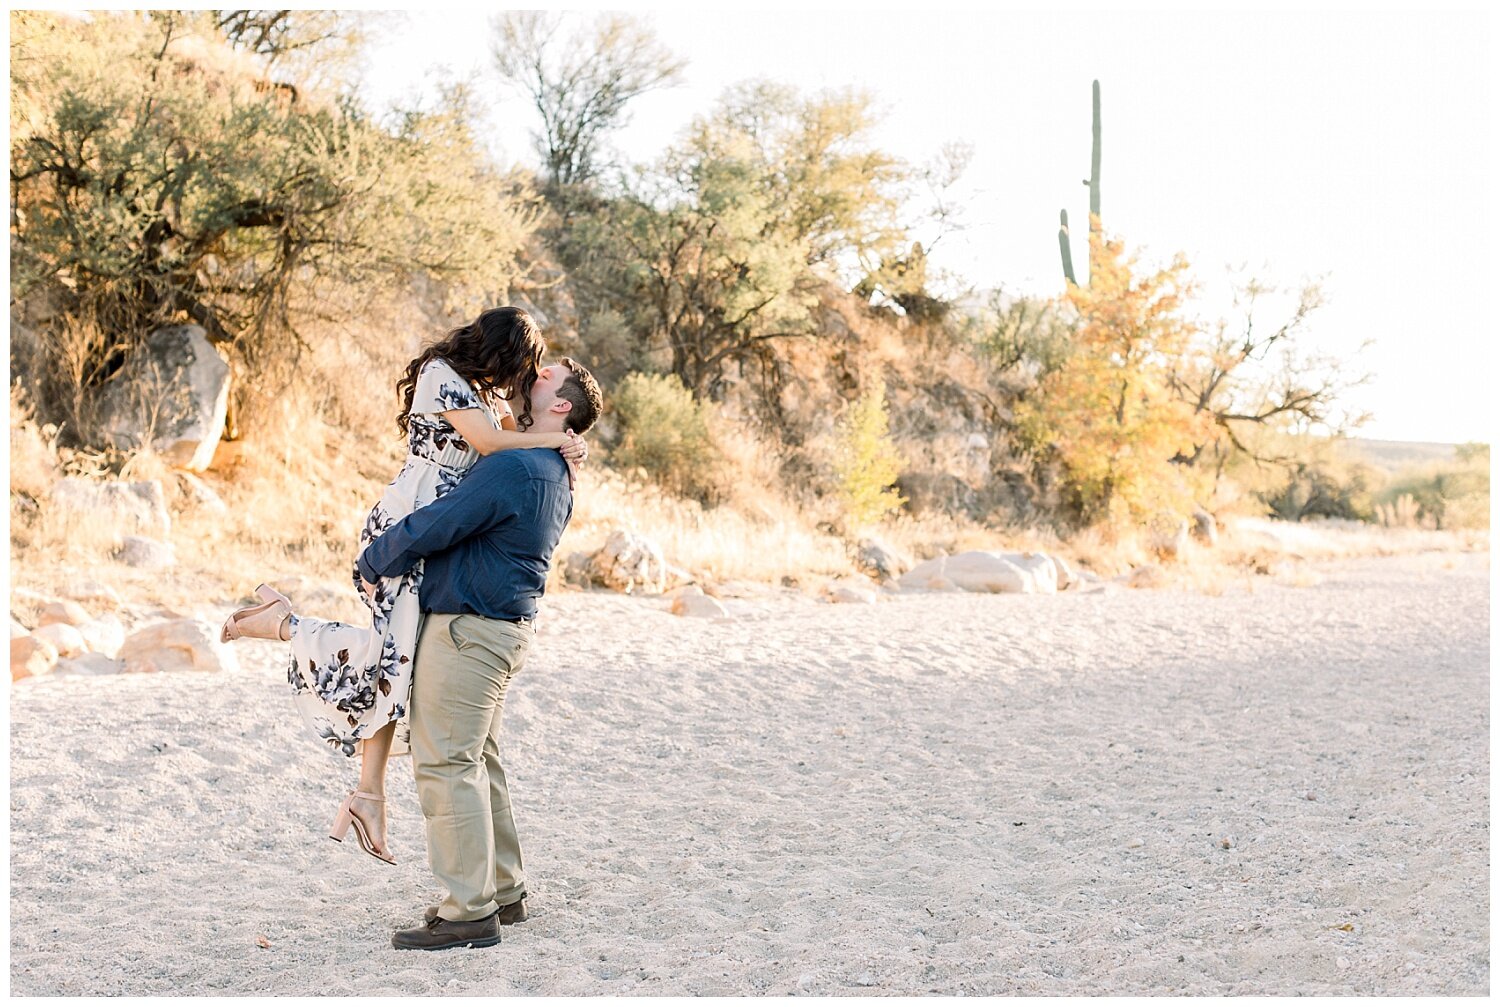 Tucson Engagement Photographer Melissa Fritzsche Photography captures in love couple sharing a romantic moment during their engagement session at Catalina State Park.